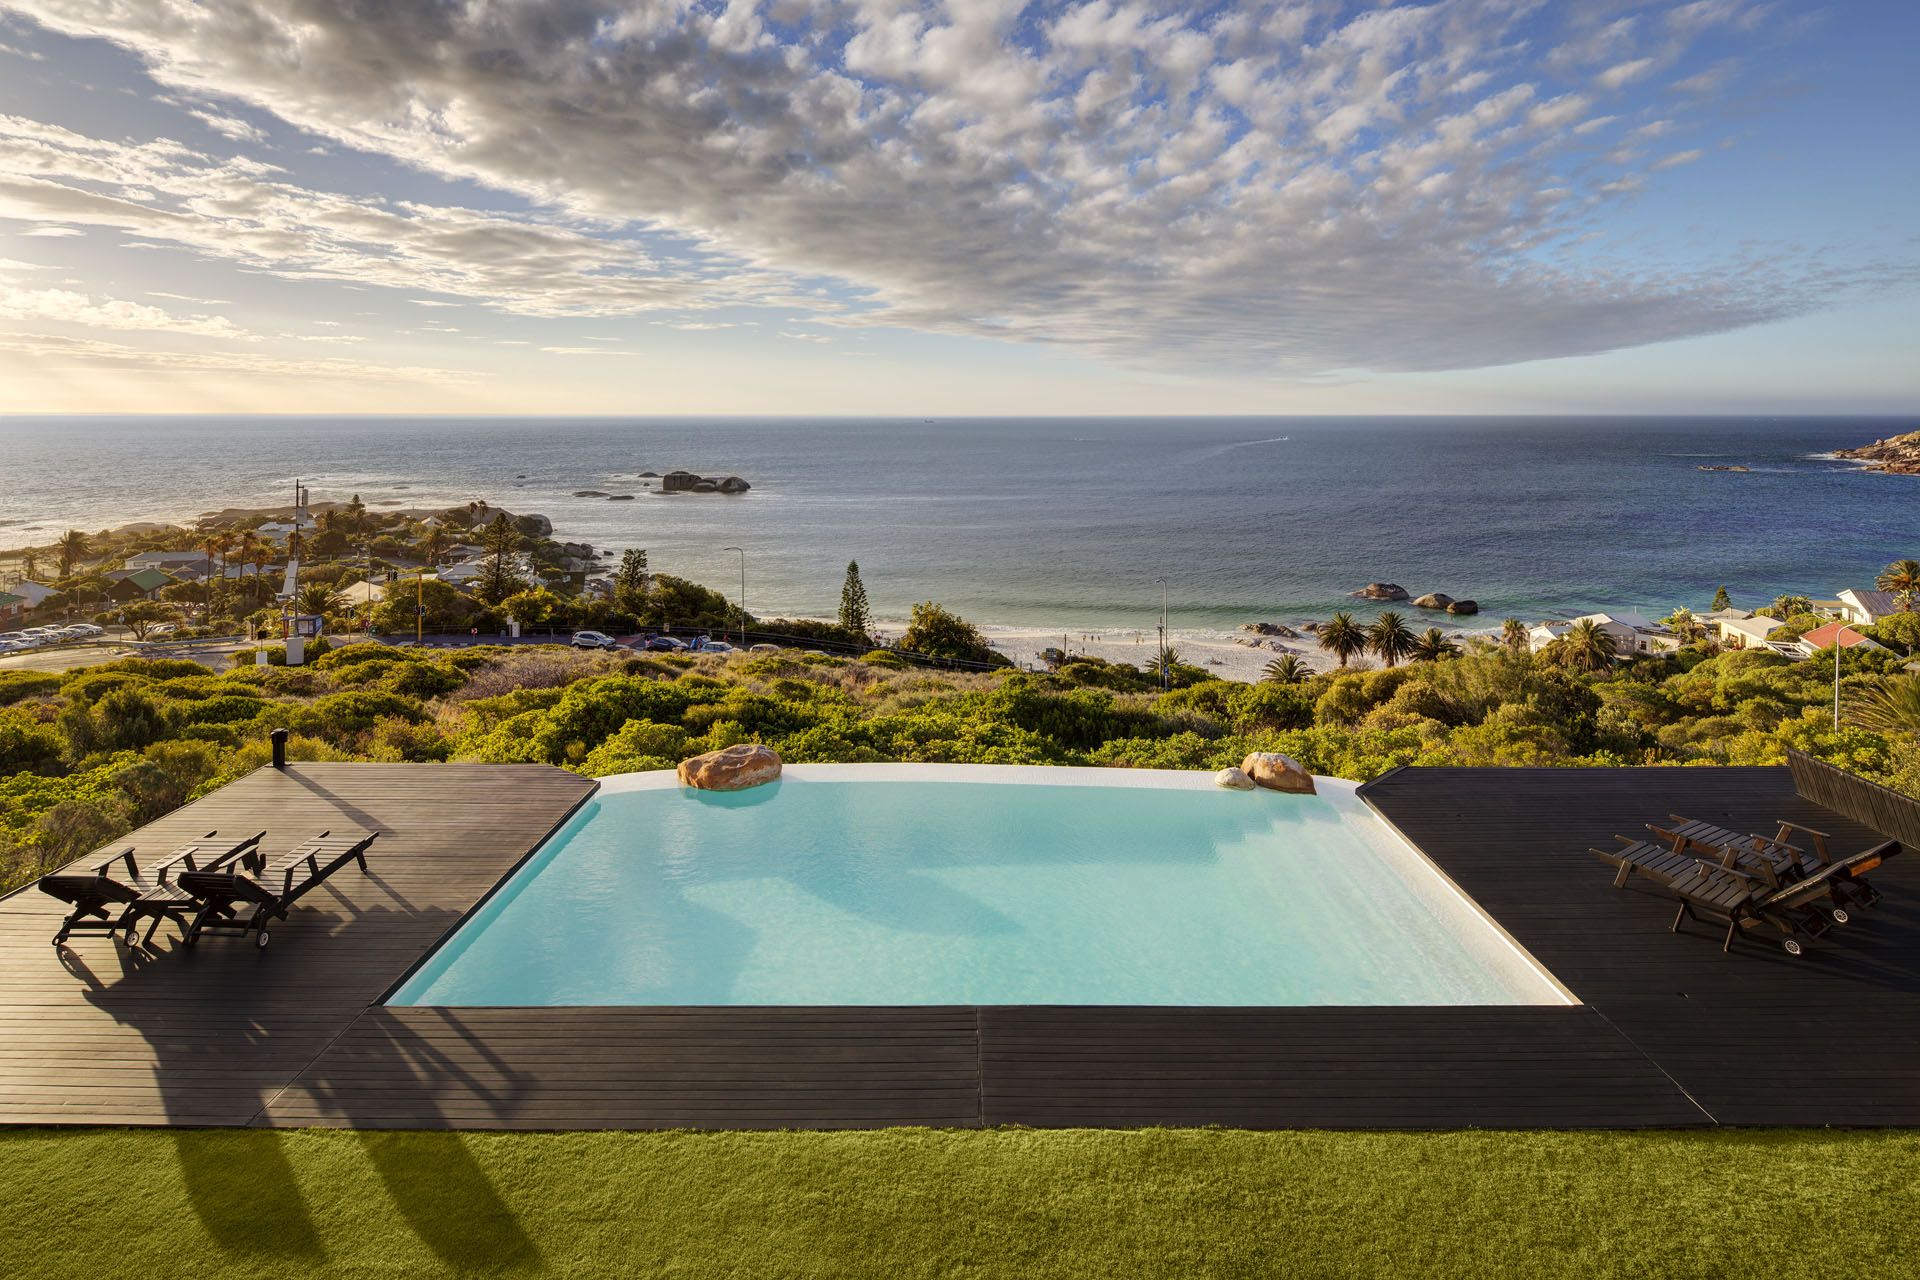 Photo 8 of La Mer accommodation in Clifton, Cape Town with 5 bedrooms and 6 bathrooms